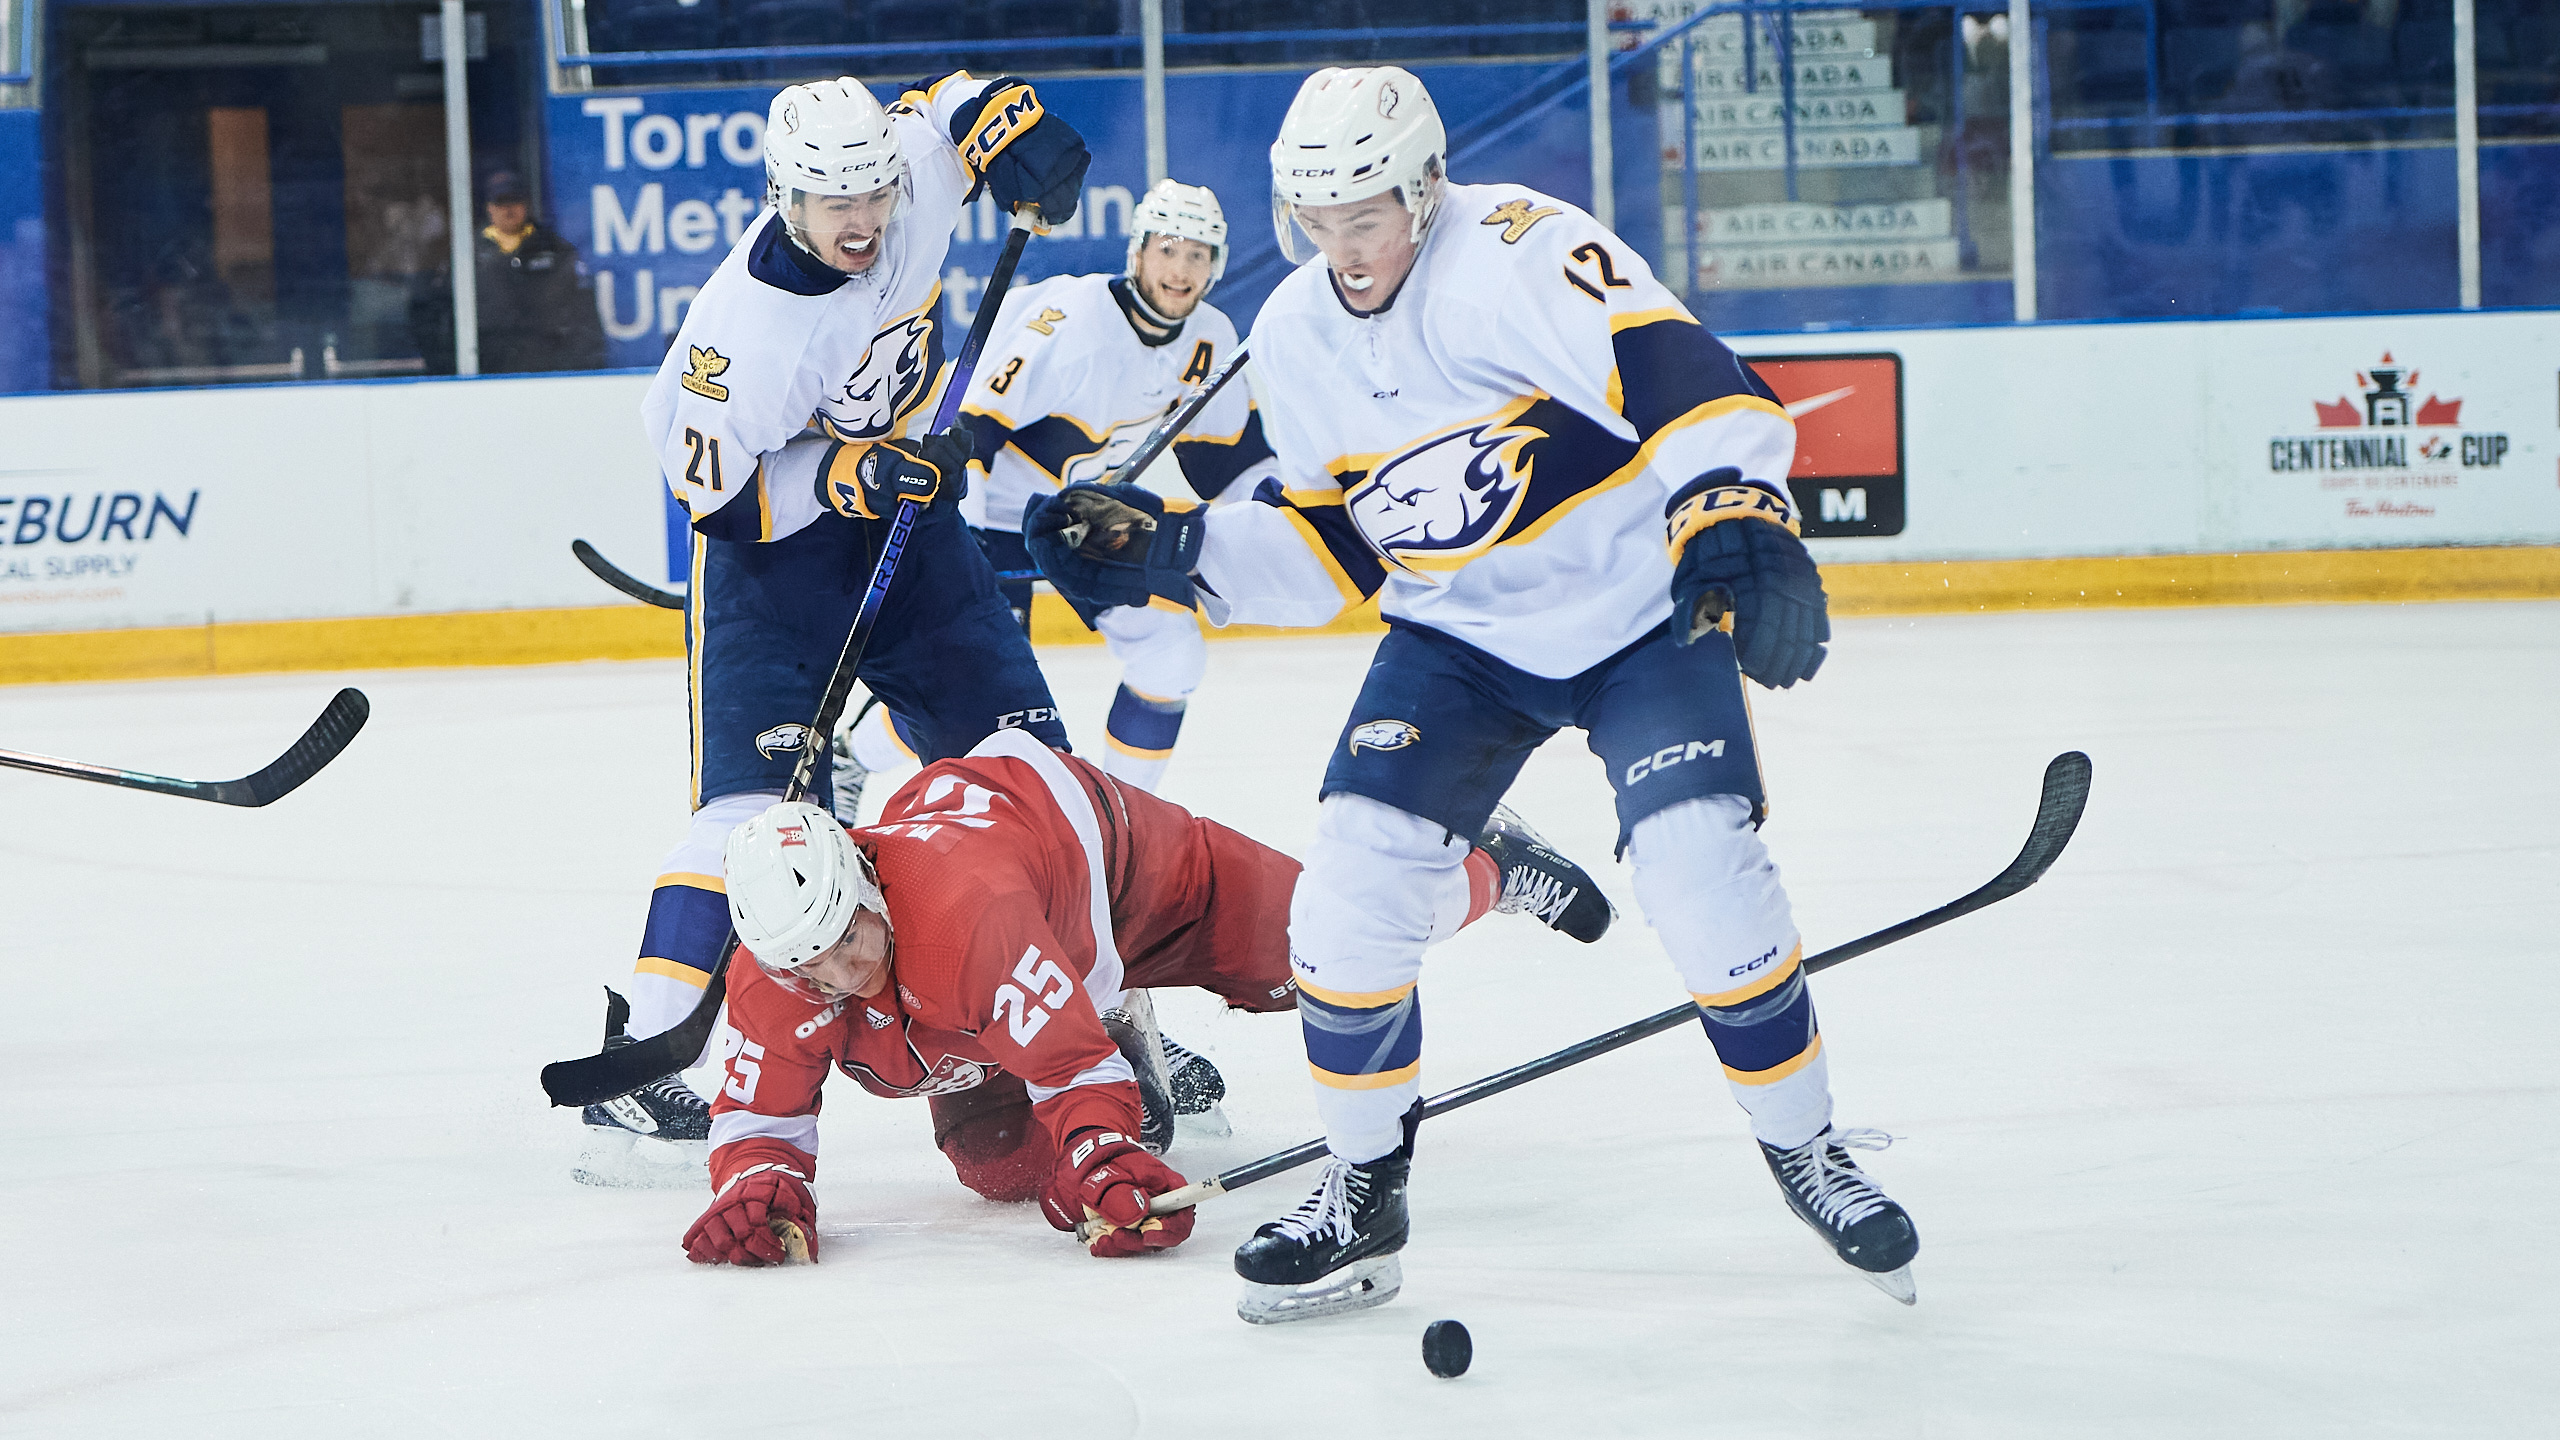 A UBC player fights for the puck over a McGill player